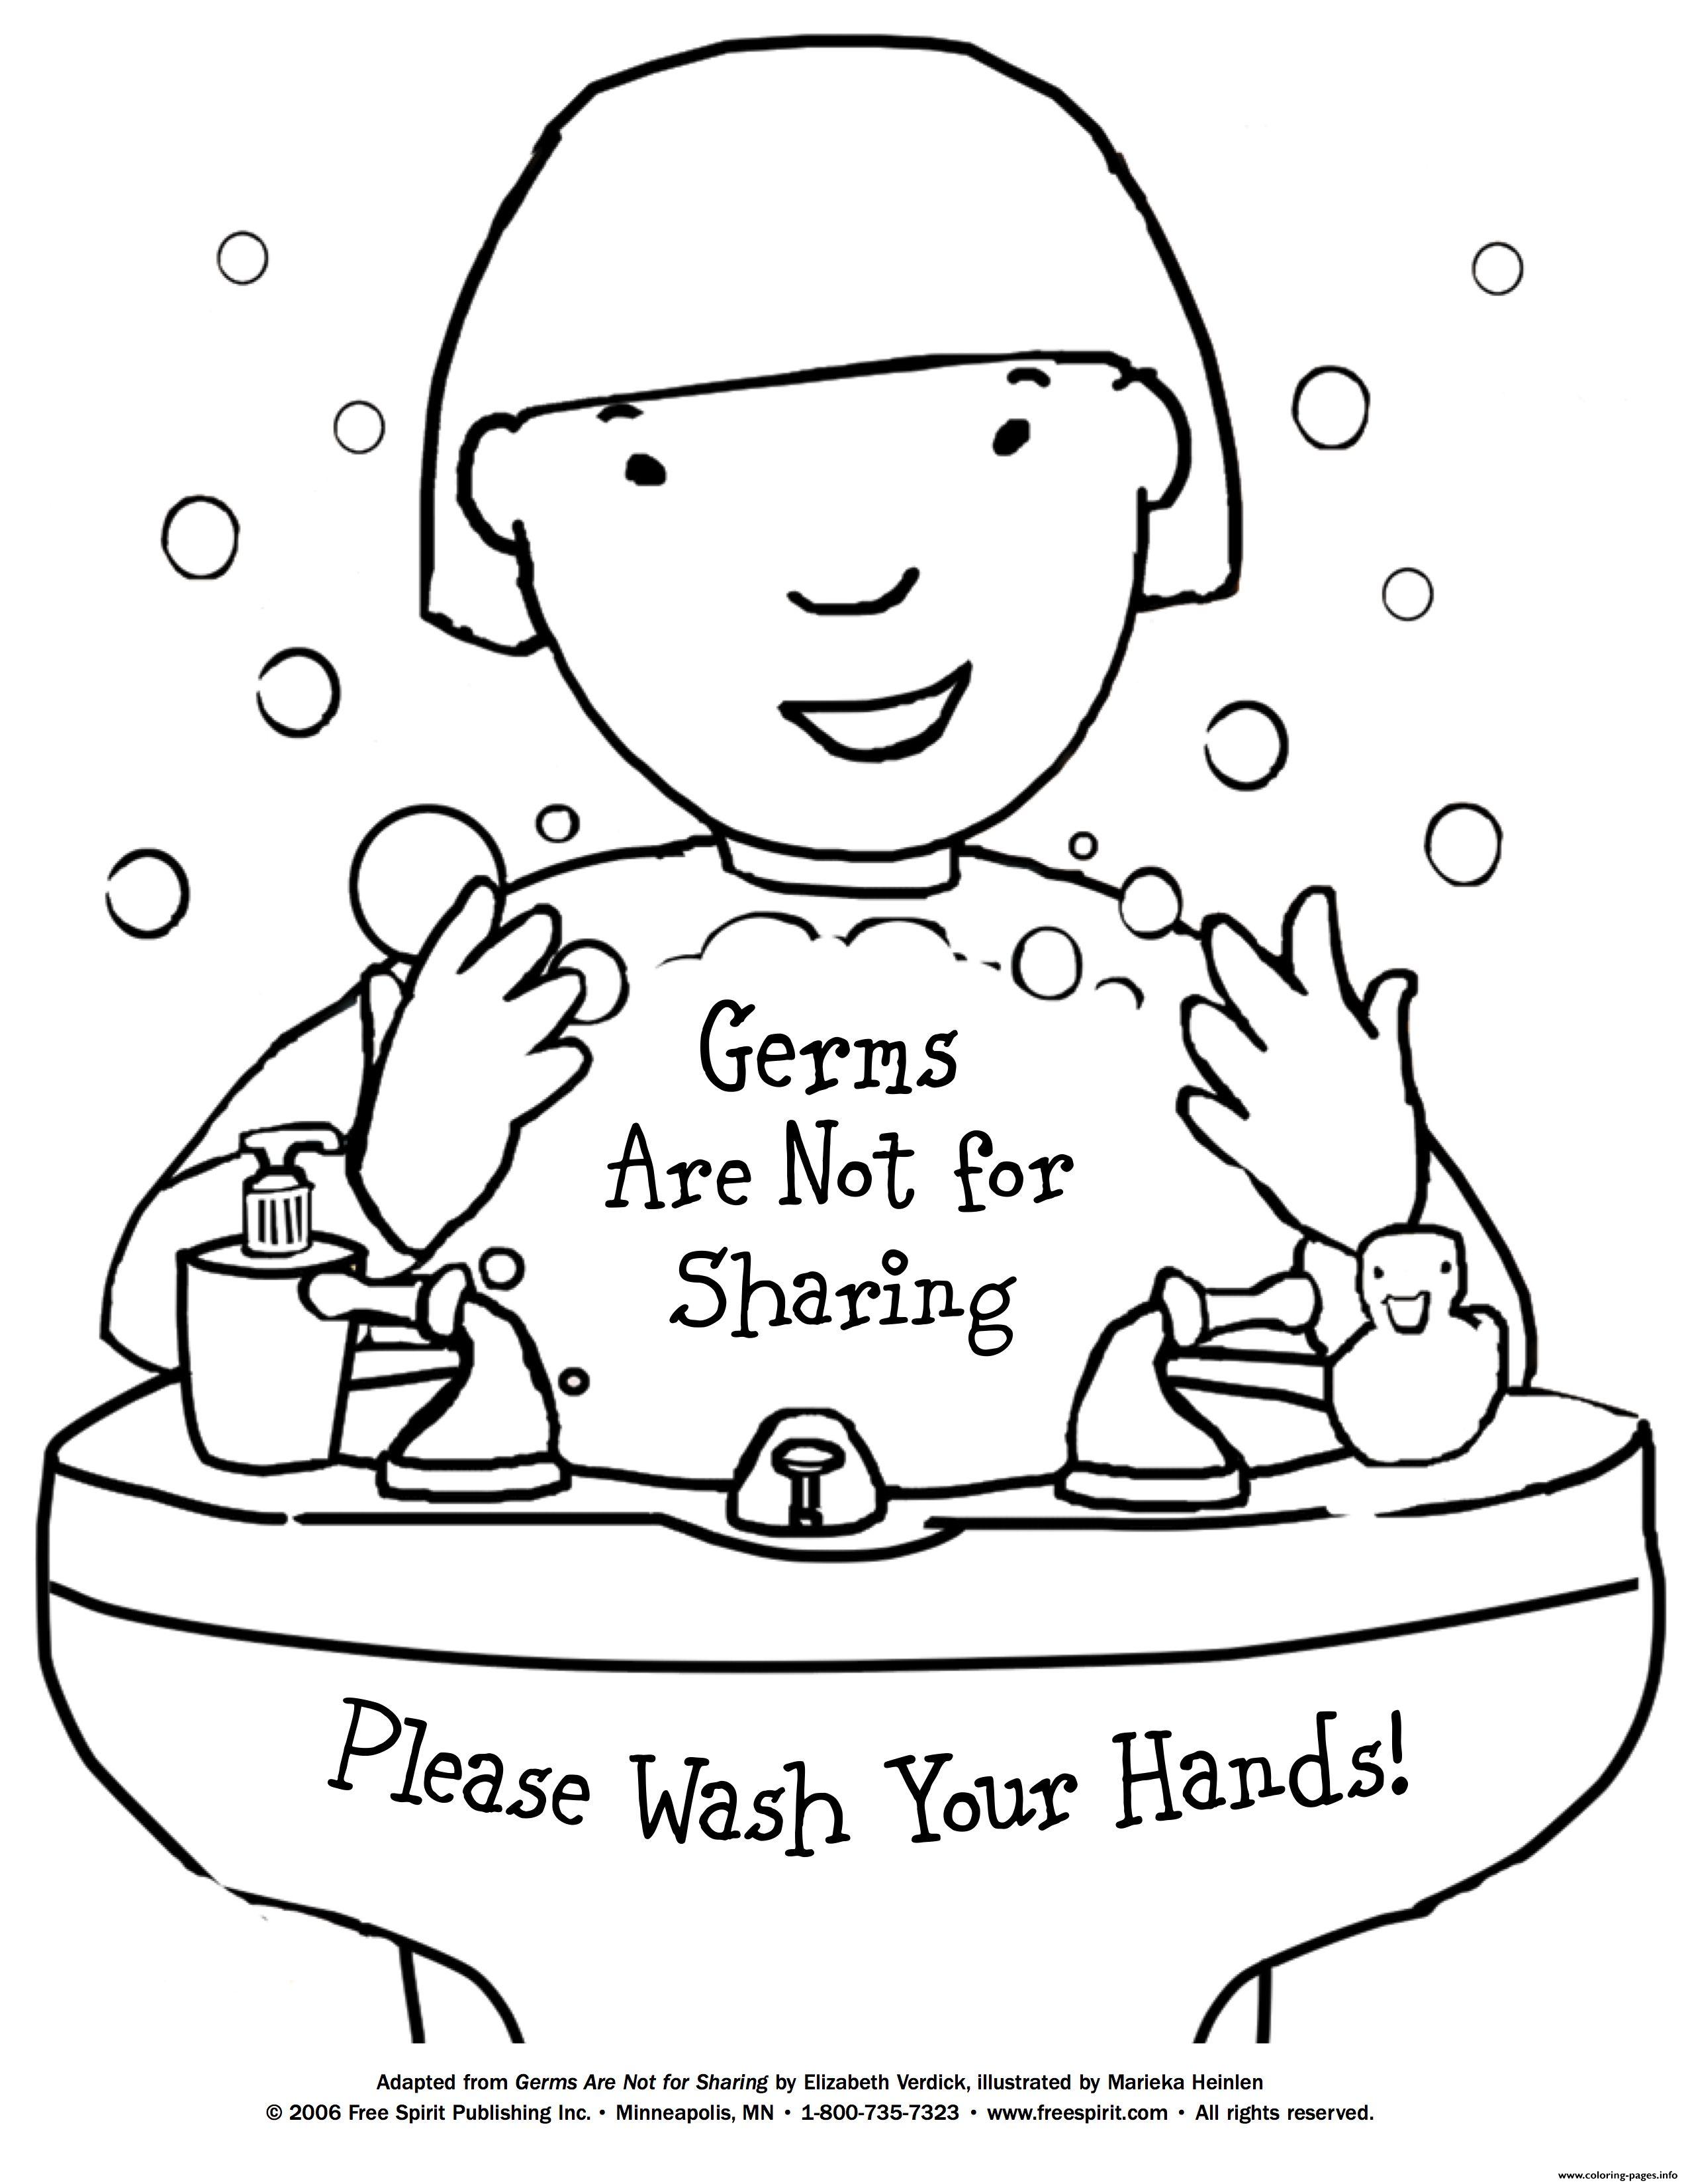 Germs Are Not For Sharing coloring